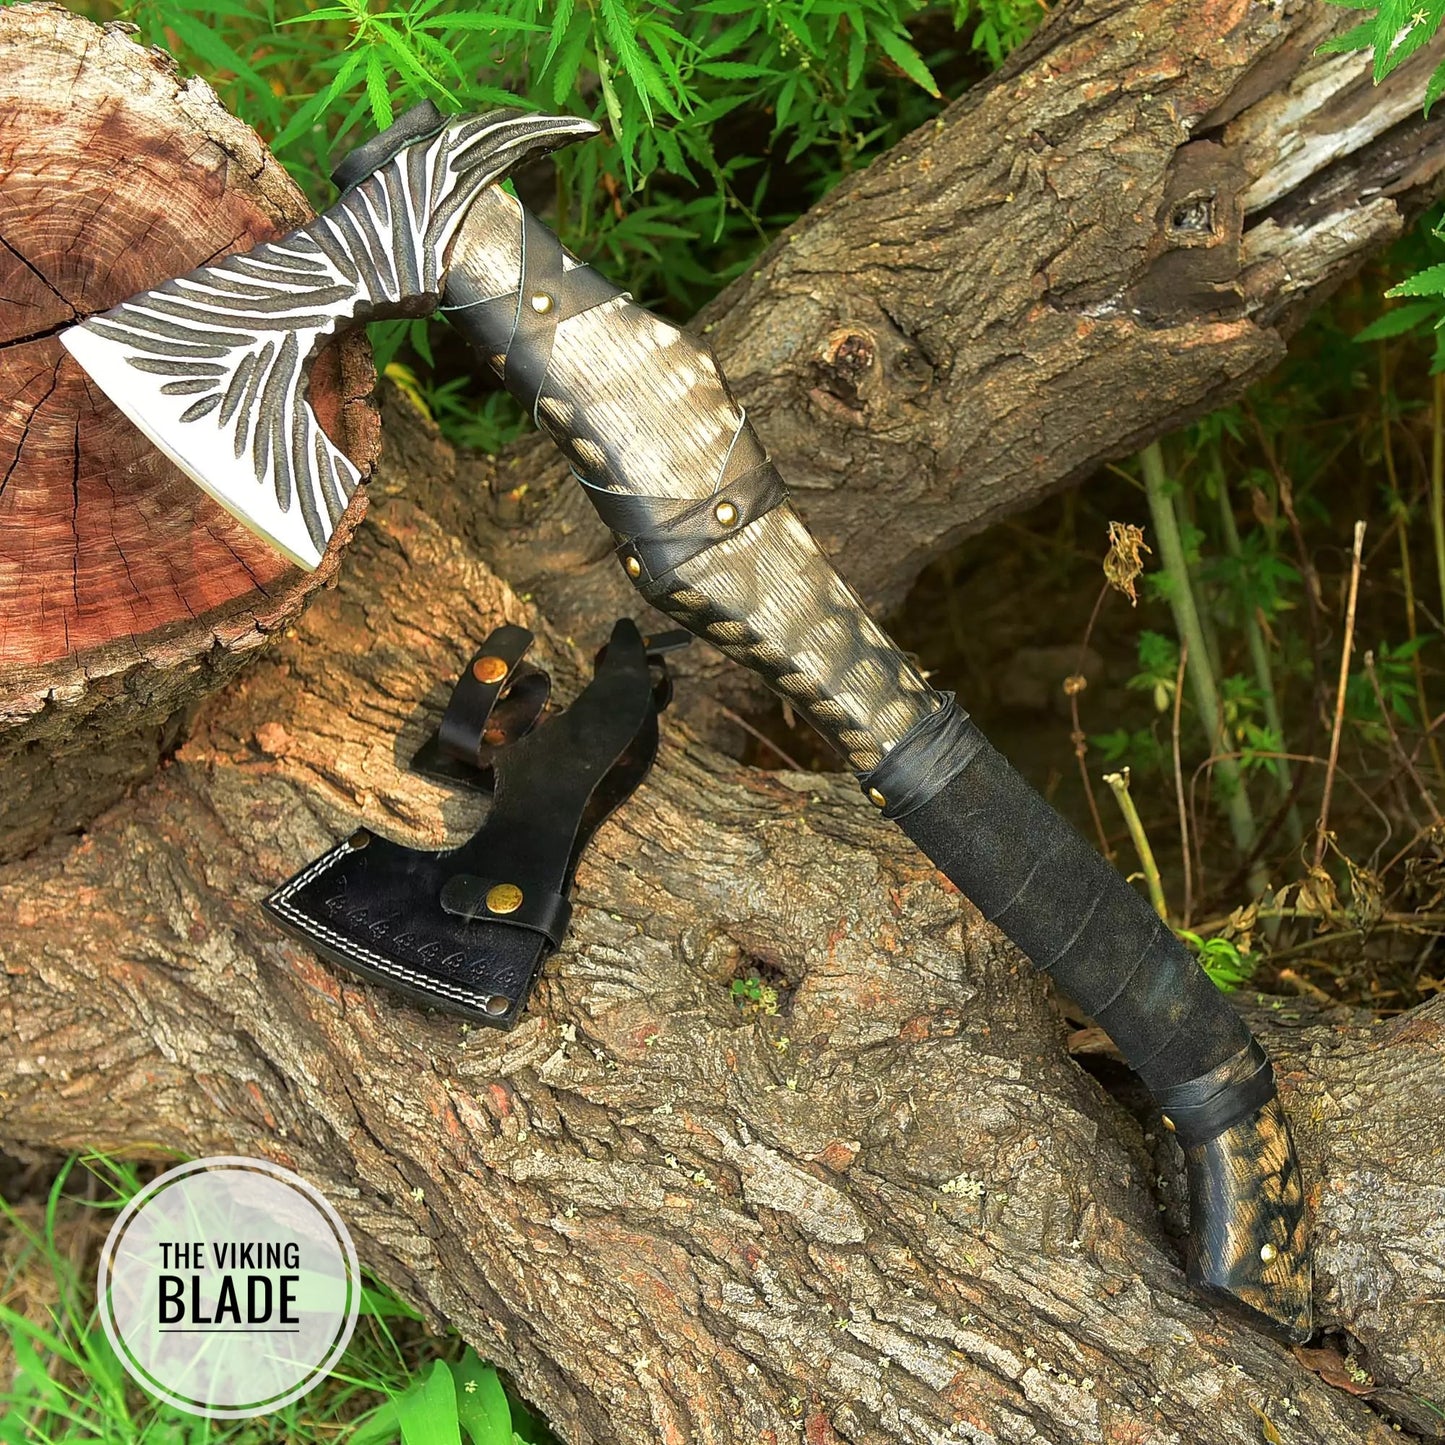 Custom Hand Forged Viking Axe With Leather Sheath |The Viking Blade|